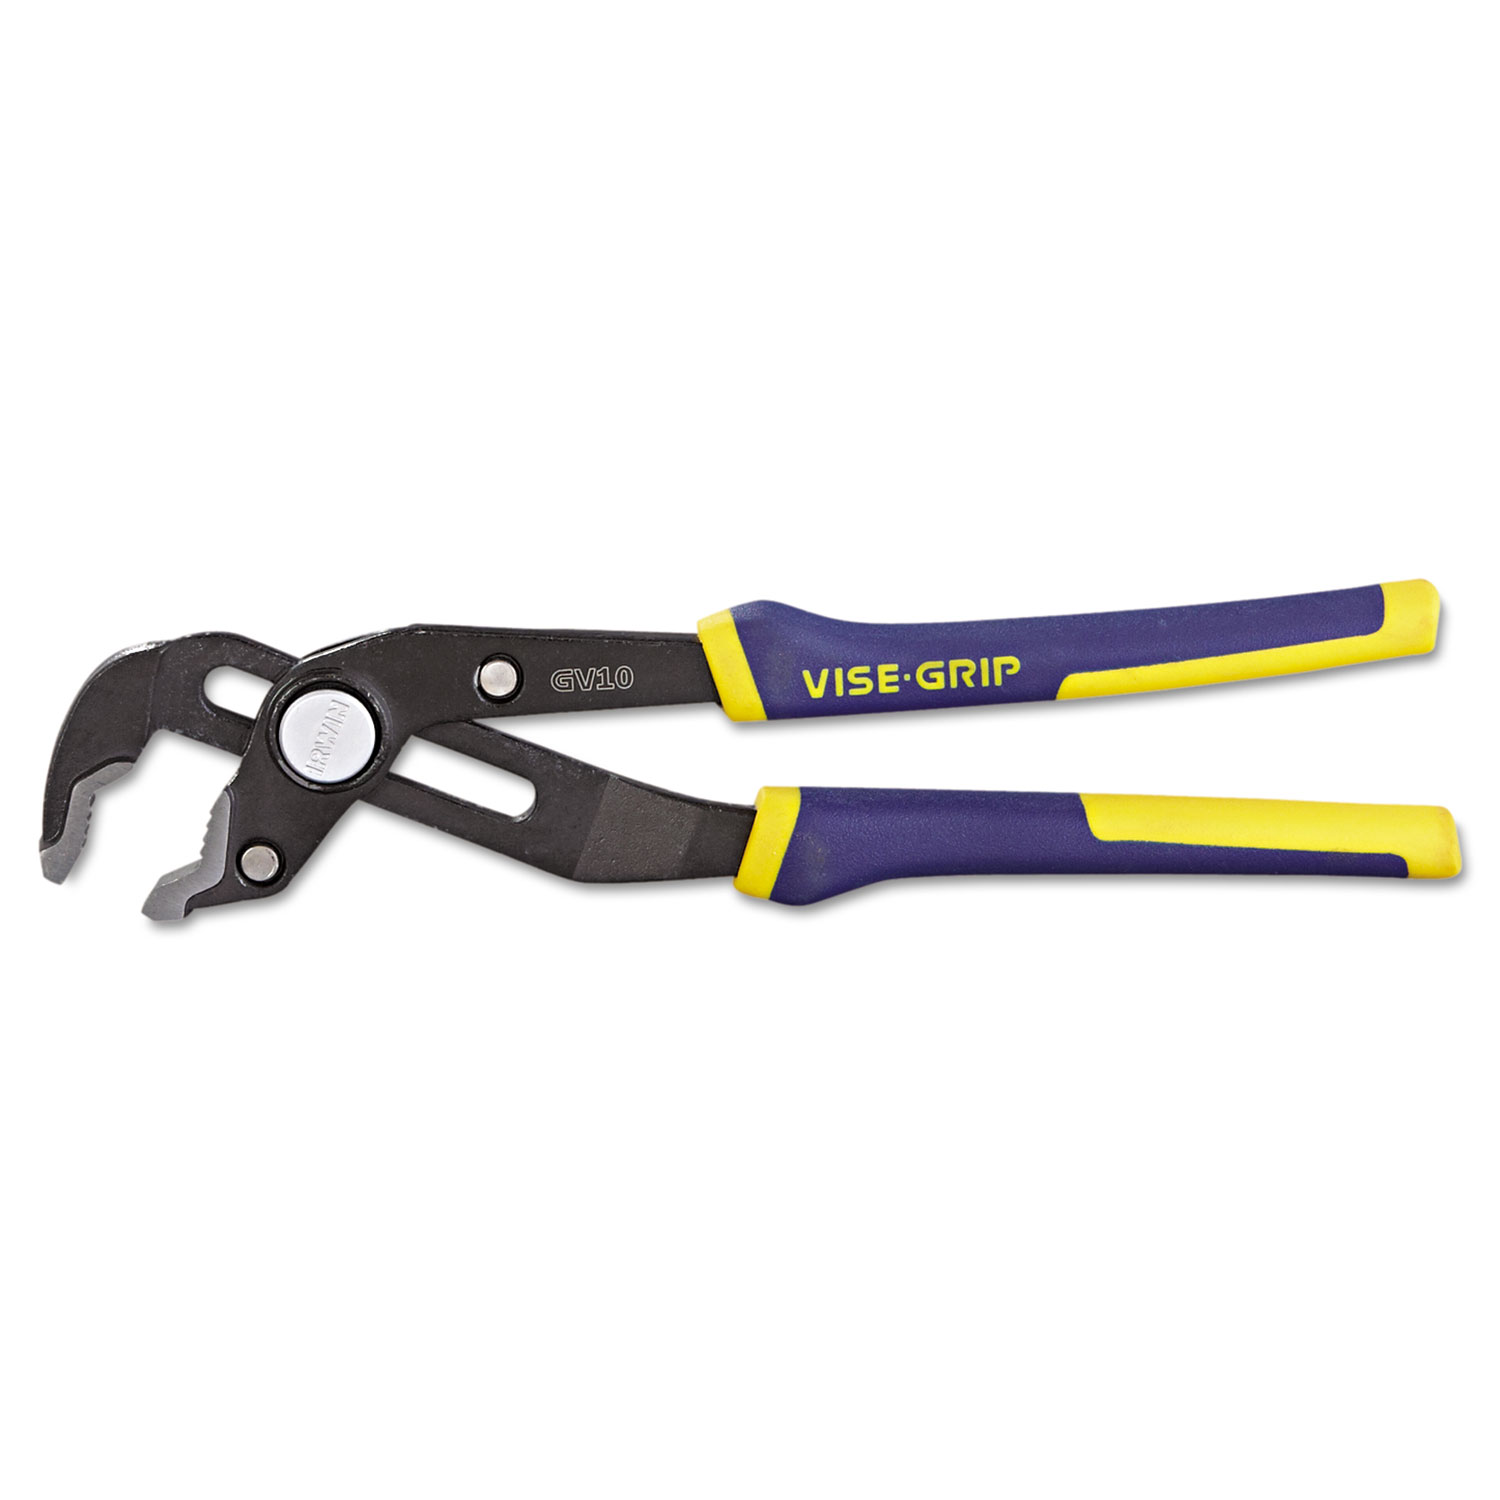 Groovelock V-Jaw Pliers, 10 Tool Length, 2 1/4 Jaw Capacity, Gray/Blue/Yellow